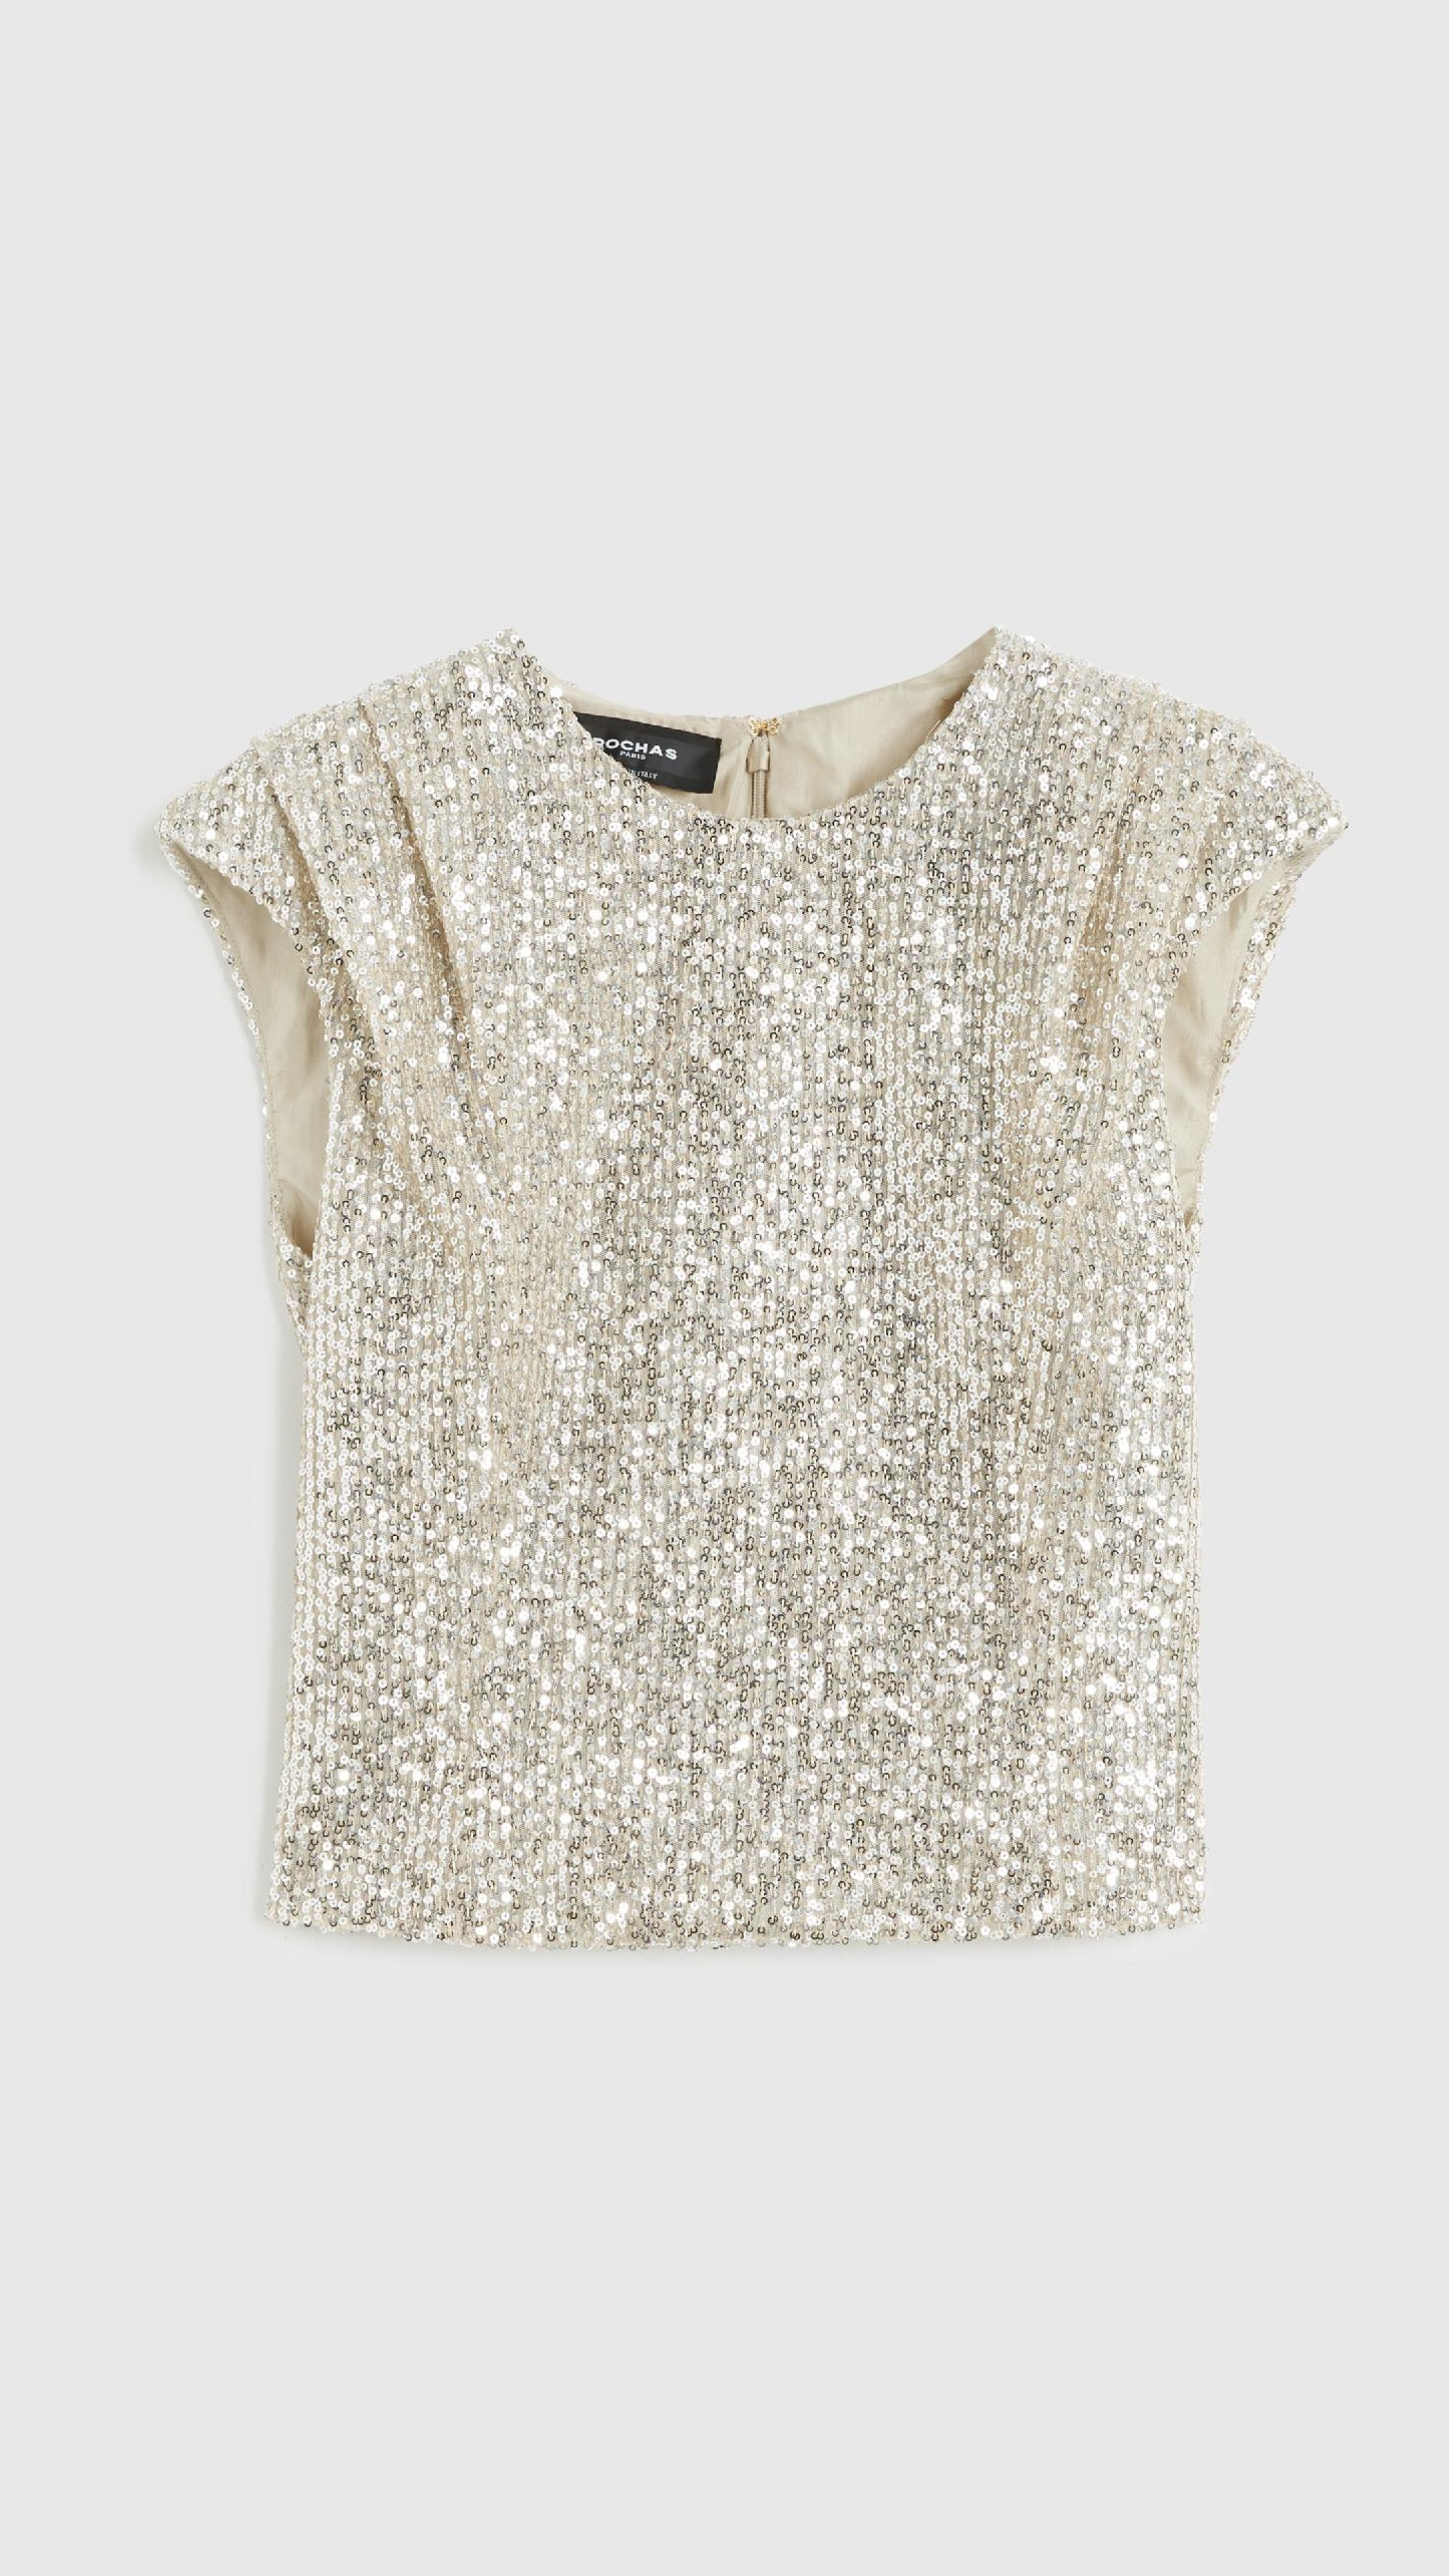 Rochas Paris Fashion Rounded Collar Sparkle Top Fitted Sleeveless Blouse with pleated shoulders in a silver sequins. Product photo shown front view.